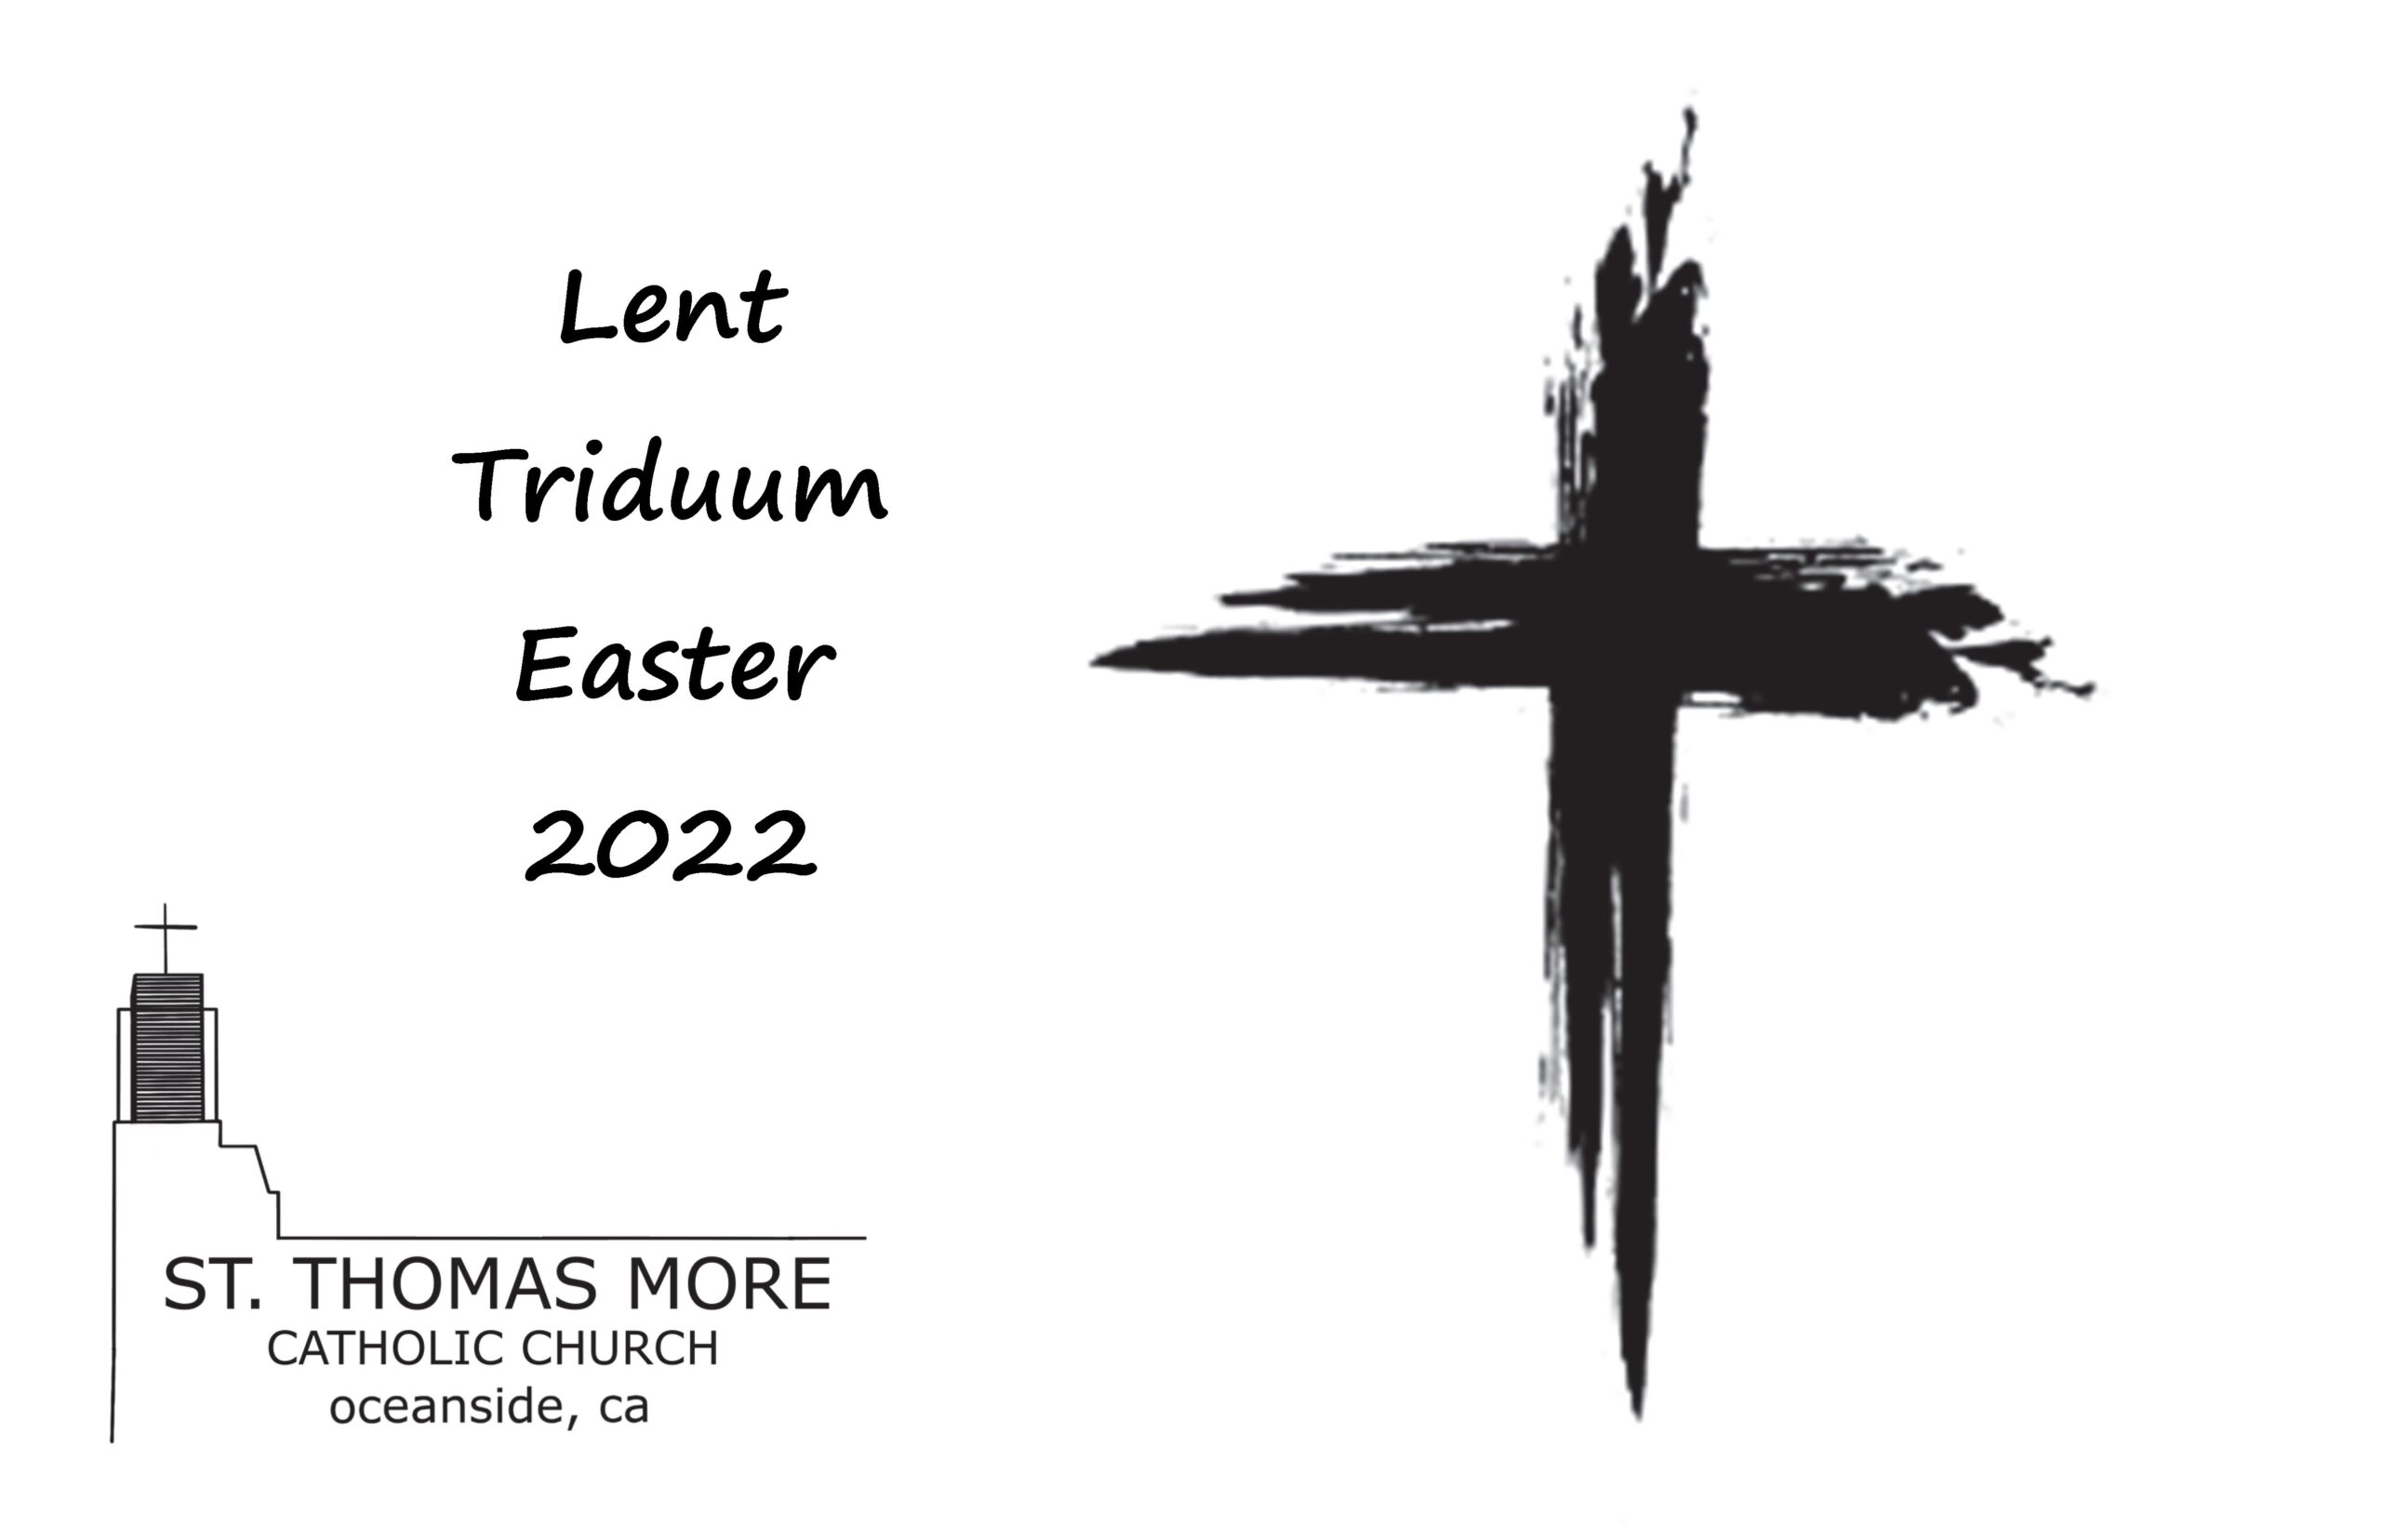 Lent, Triduum, and Easter Schedules